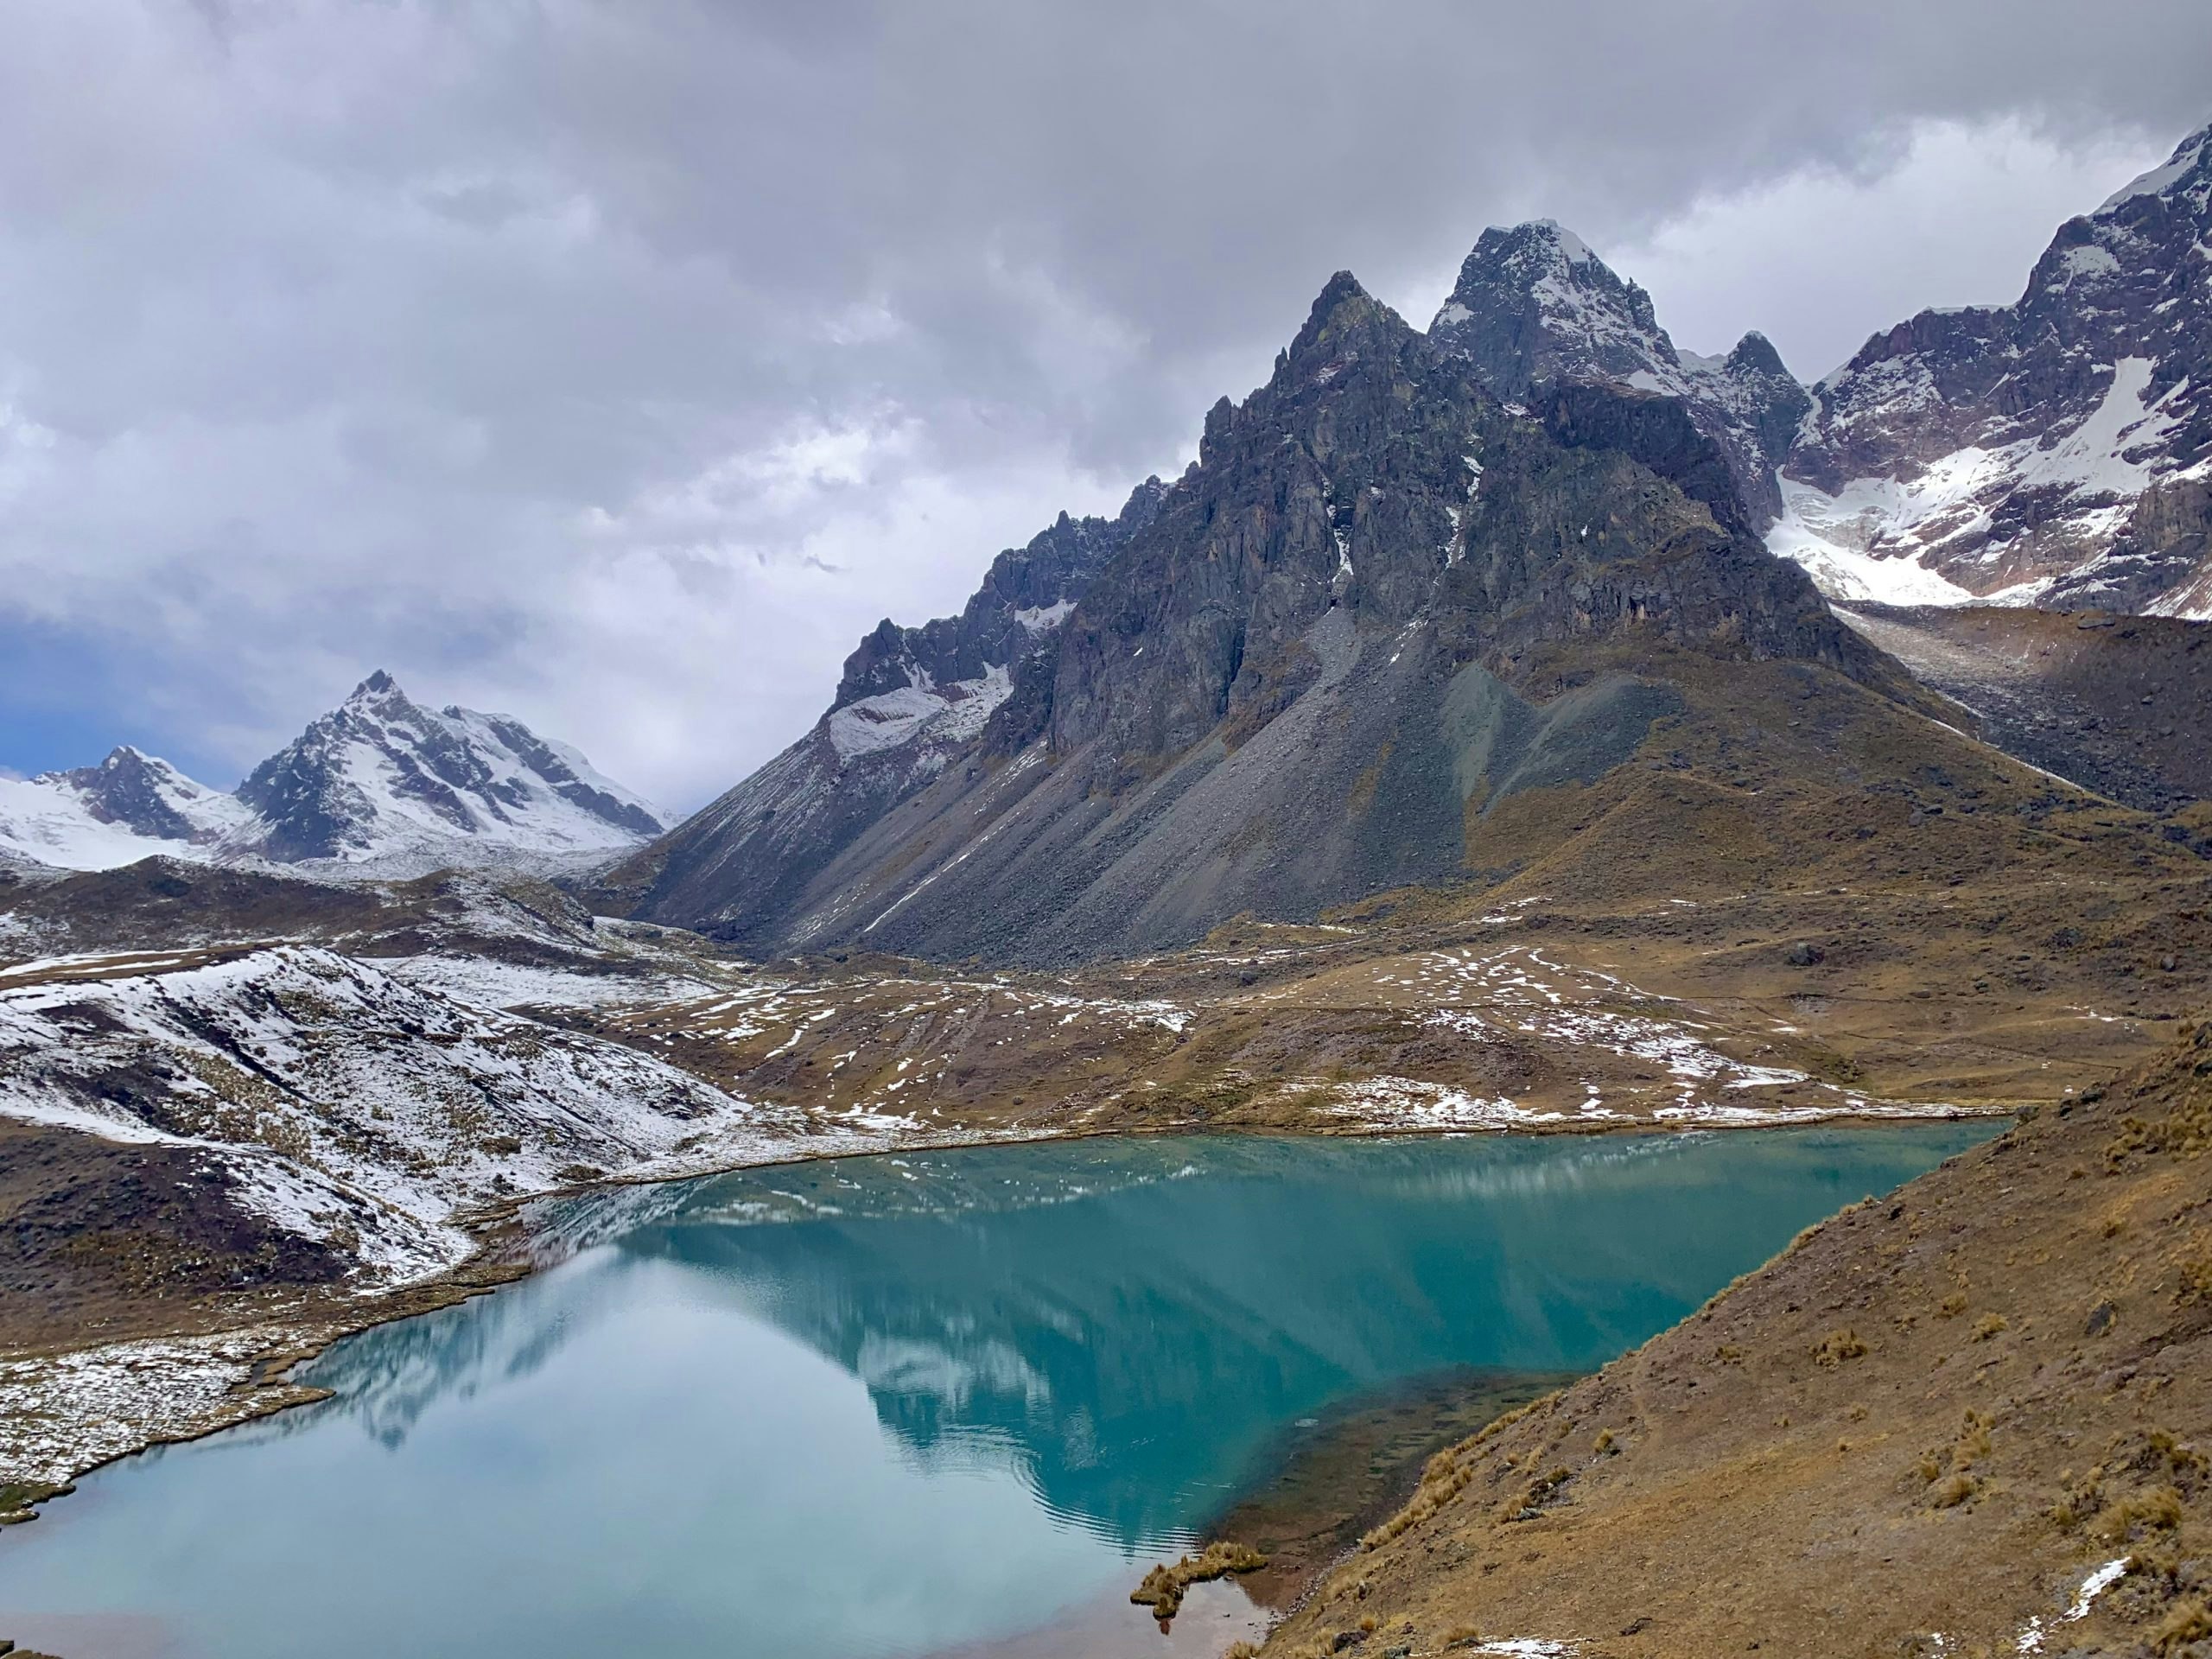 The Beauty and Ruggedness of Peru: Why Rustic’s Programs in this Nation Are So Popular